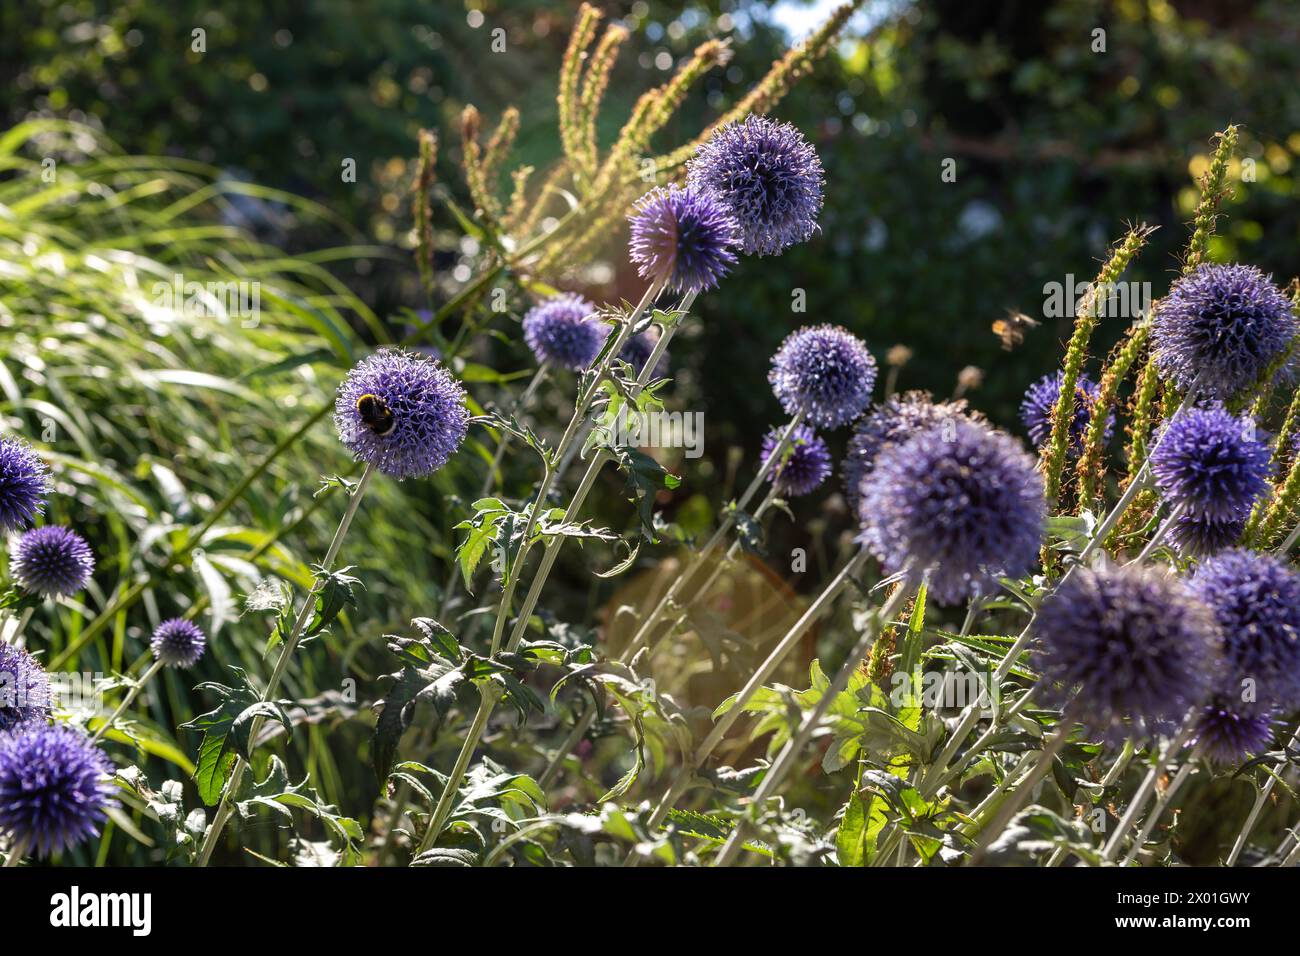 Echinops ritro 'Veitch's Blue' (globe thistle) blue spherical flowerheads in a garden herbaceous border Stock Photo